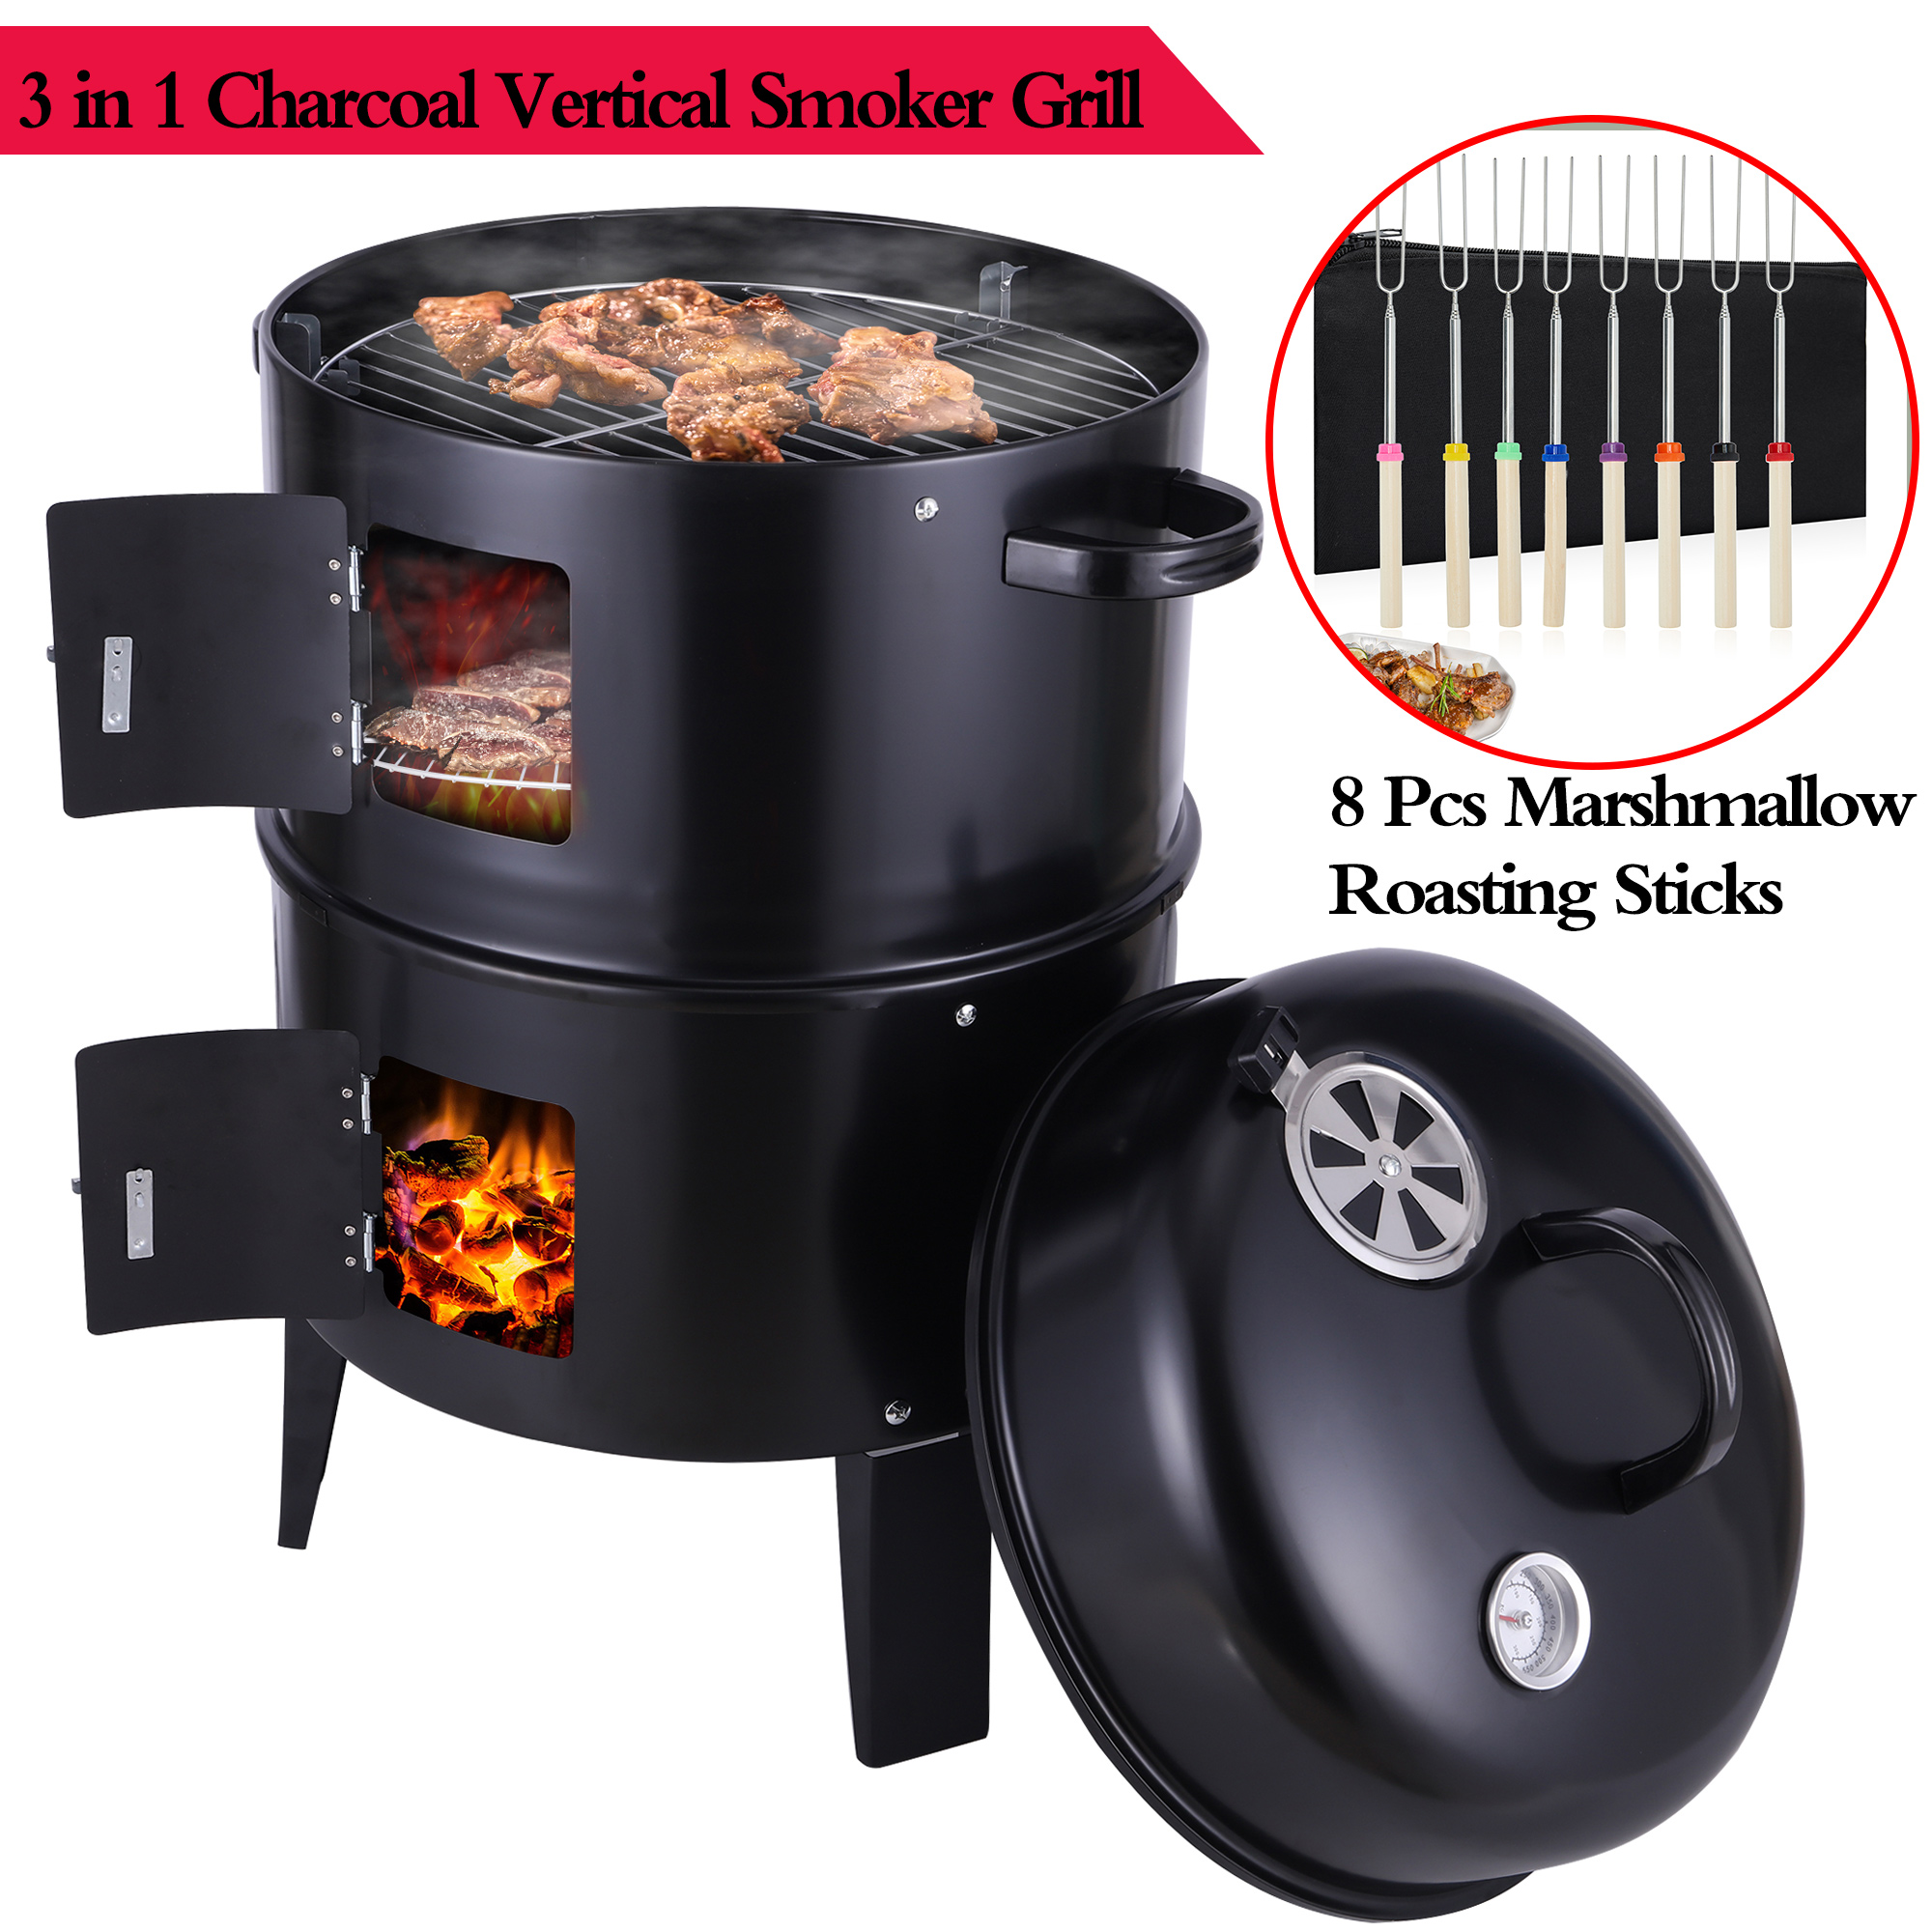 LELINTA Charcoal Grill Portable BBQ Grill, with Oversize Cooking Area, Outdoor Cooking Grill with 2 Individual Lifting Charcoal Trays and 8PCS Marshmallow Roasting Sticks - image 1 of 8